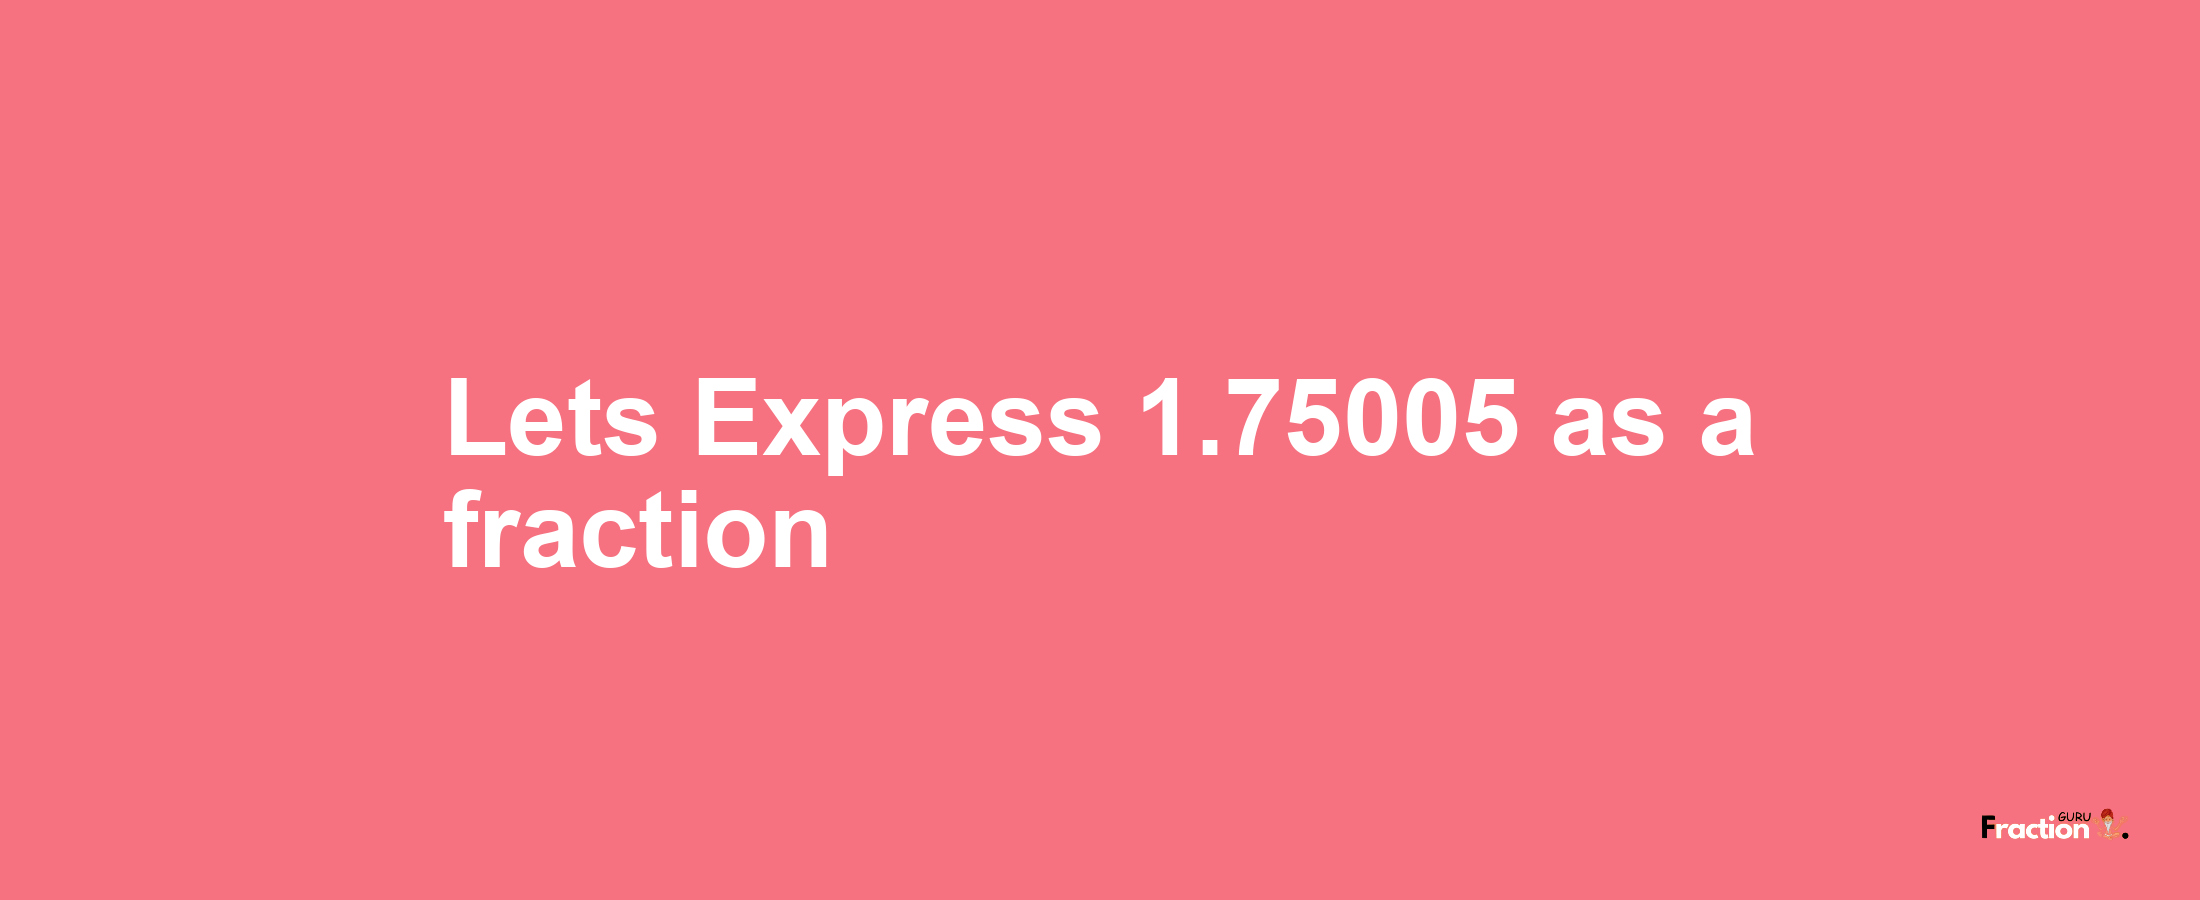 Lets Express 1.75005 as afraction